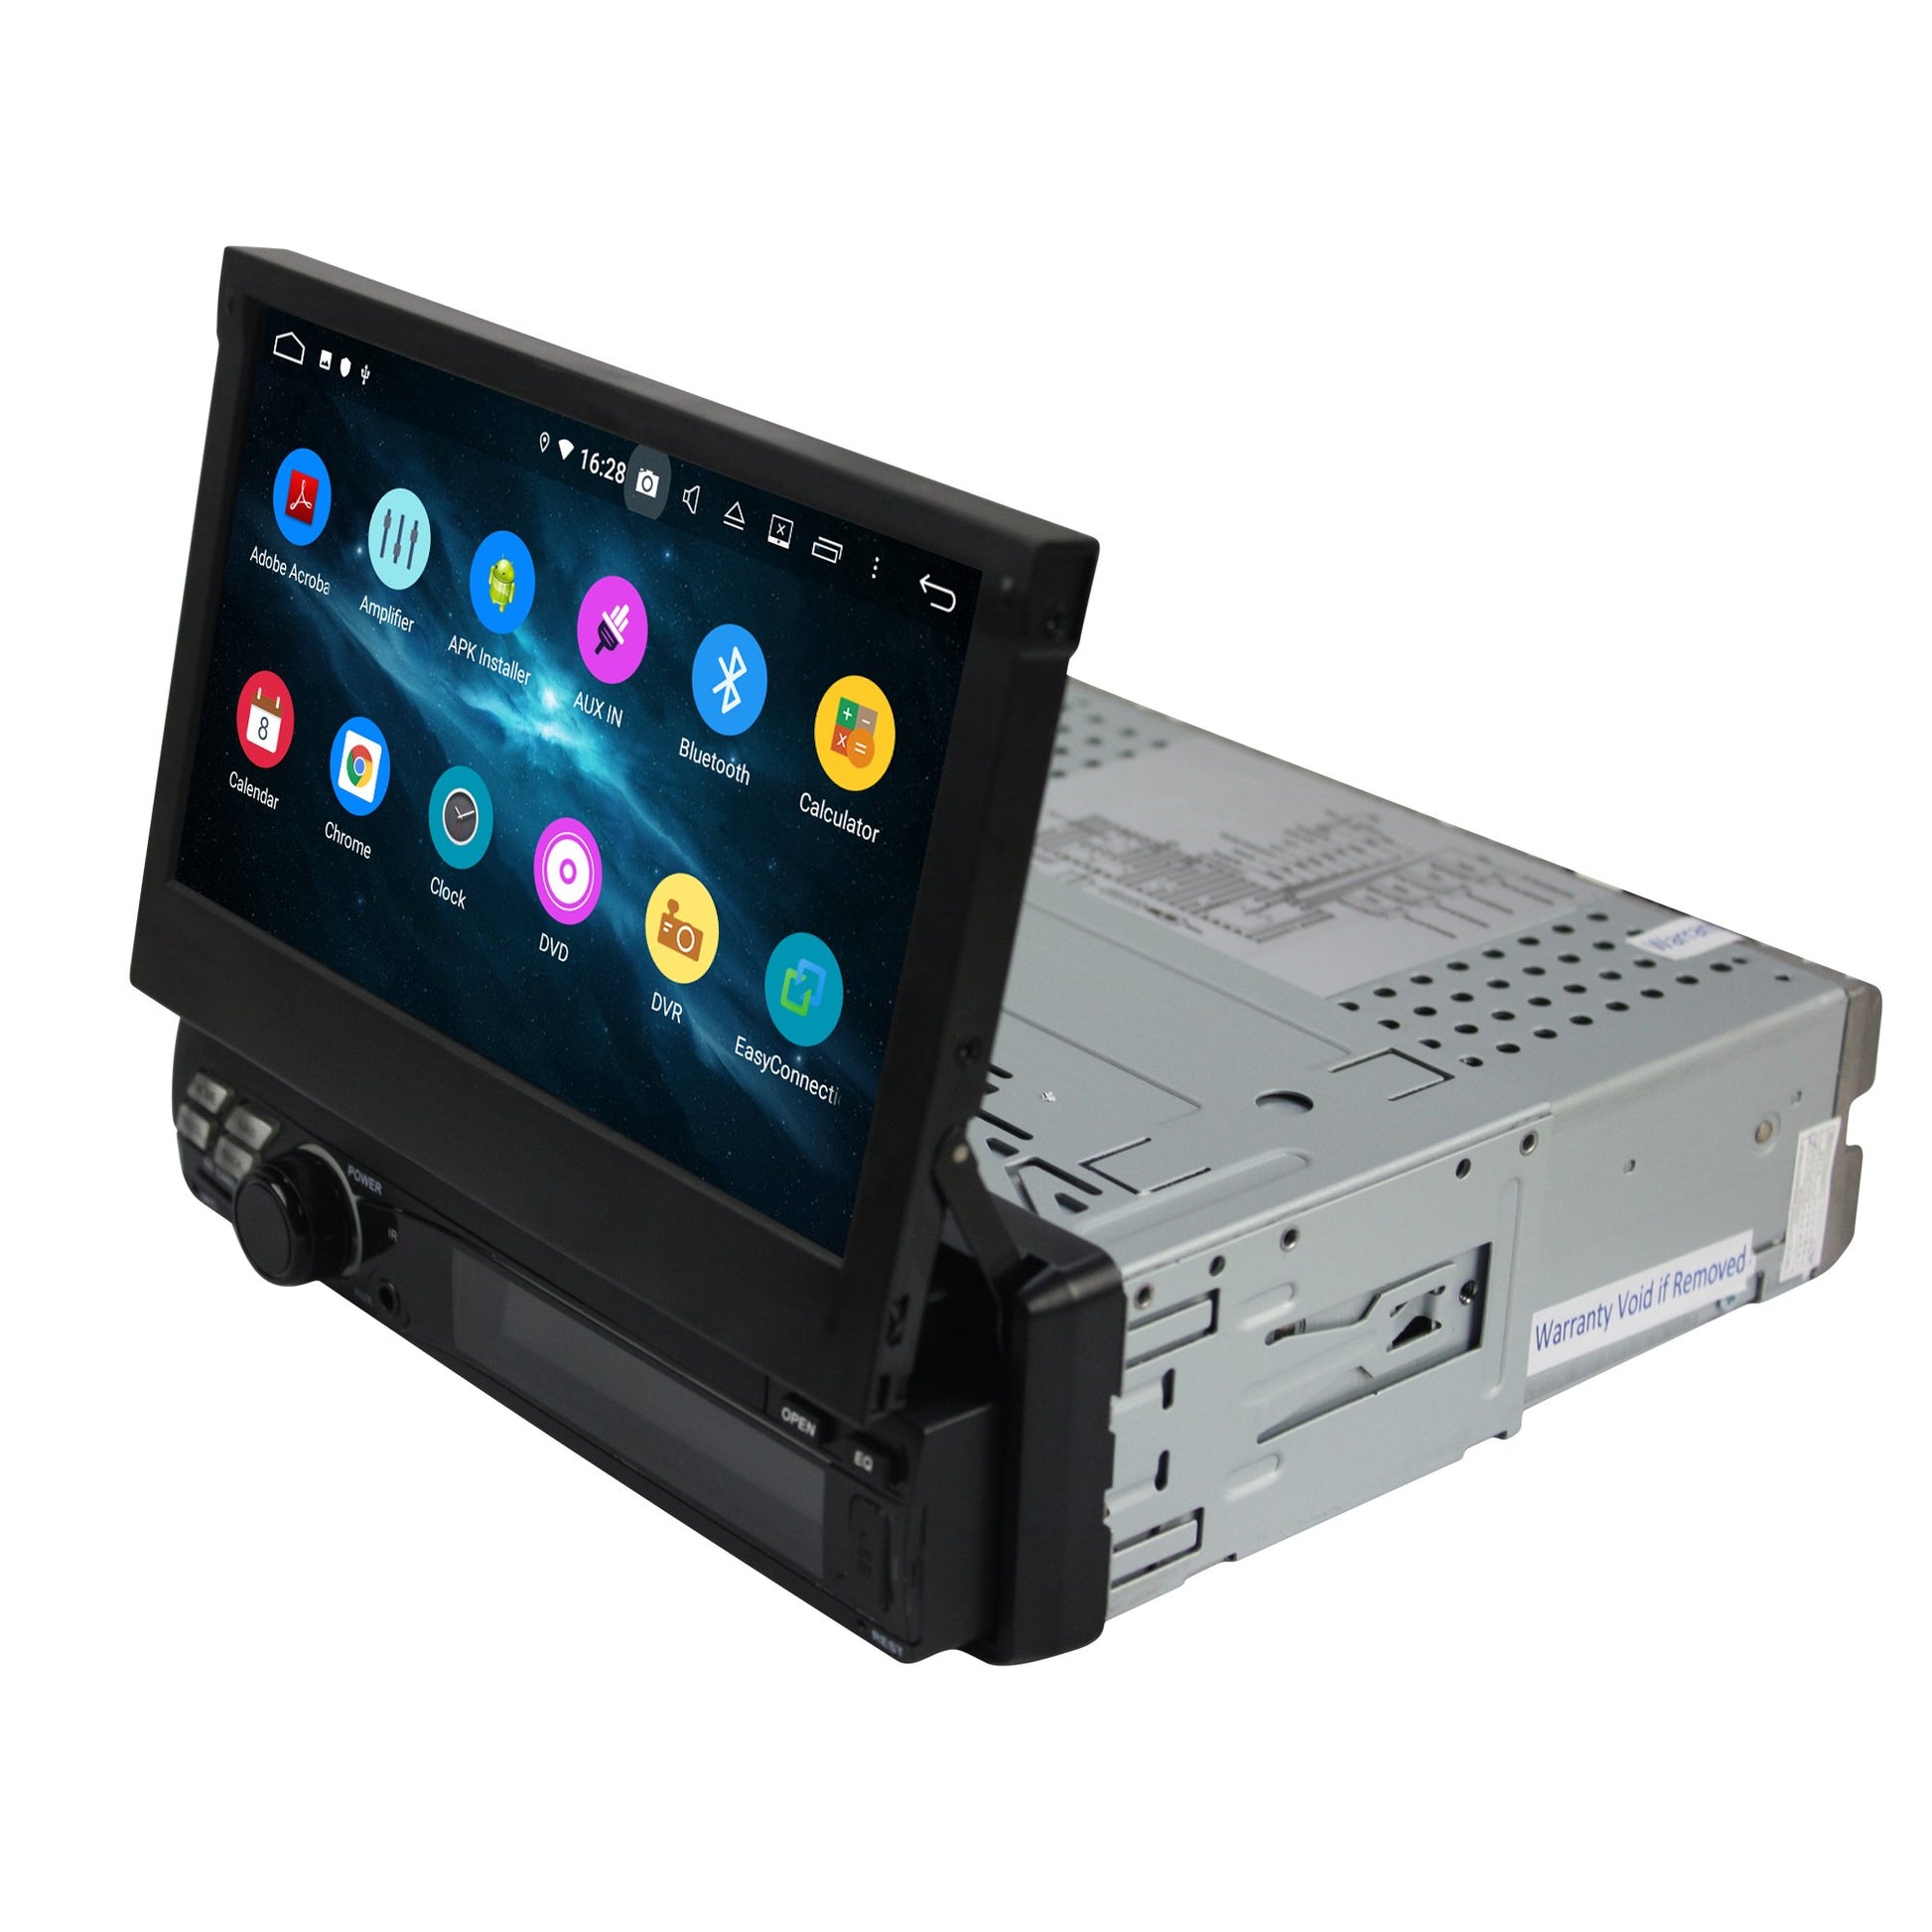 One Din 7" Six-core Eight-core Android 10.0 OEM Navigation Universa Radio - Phoenix Android Radios